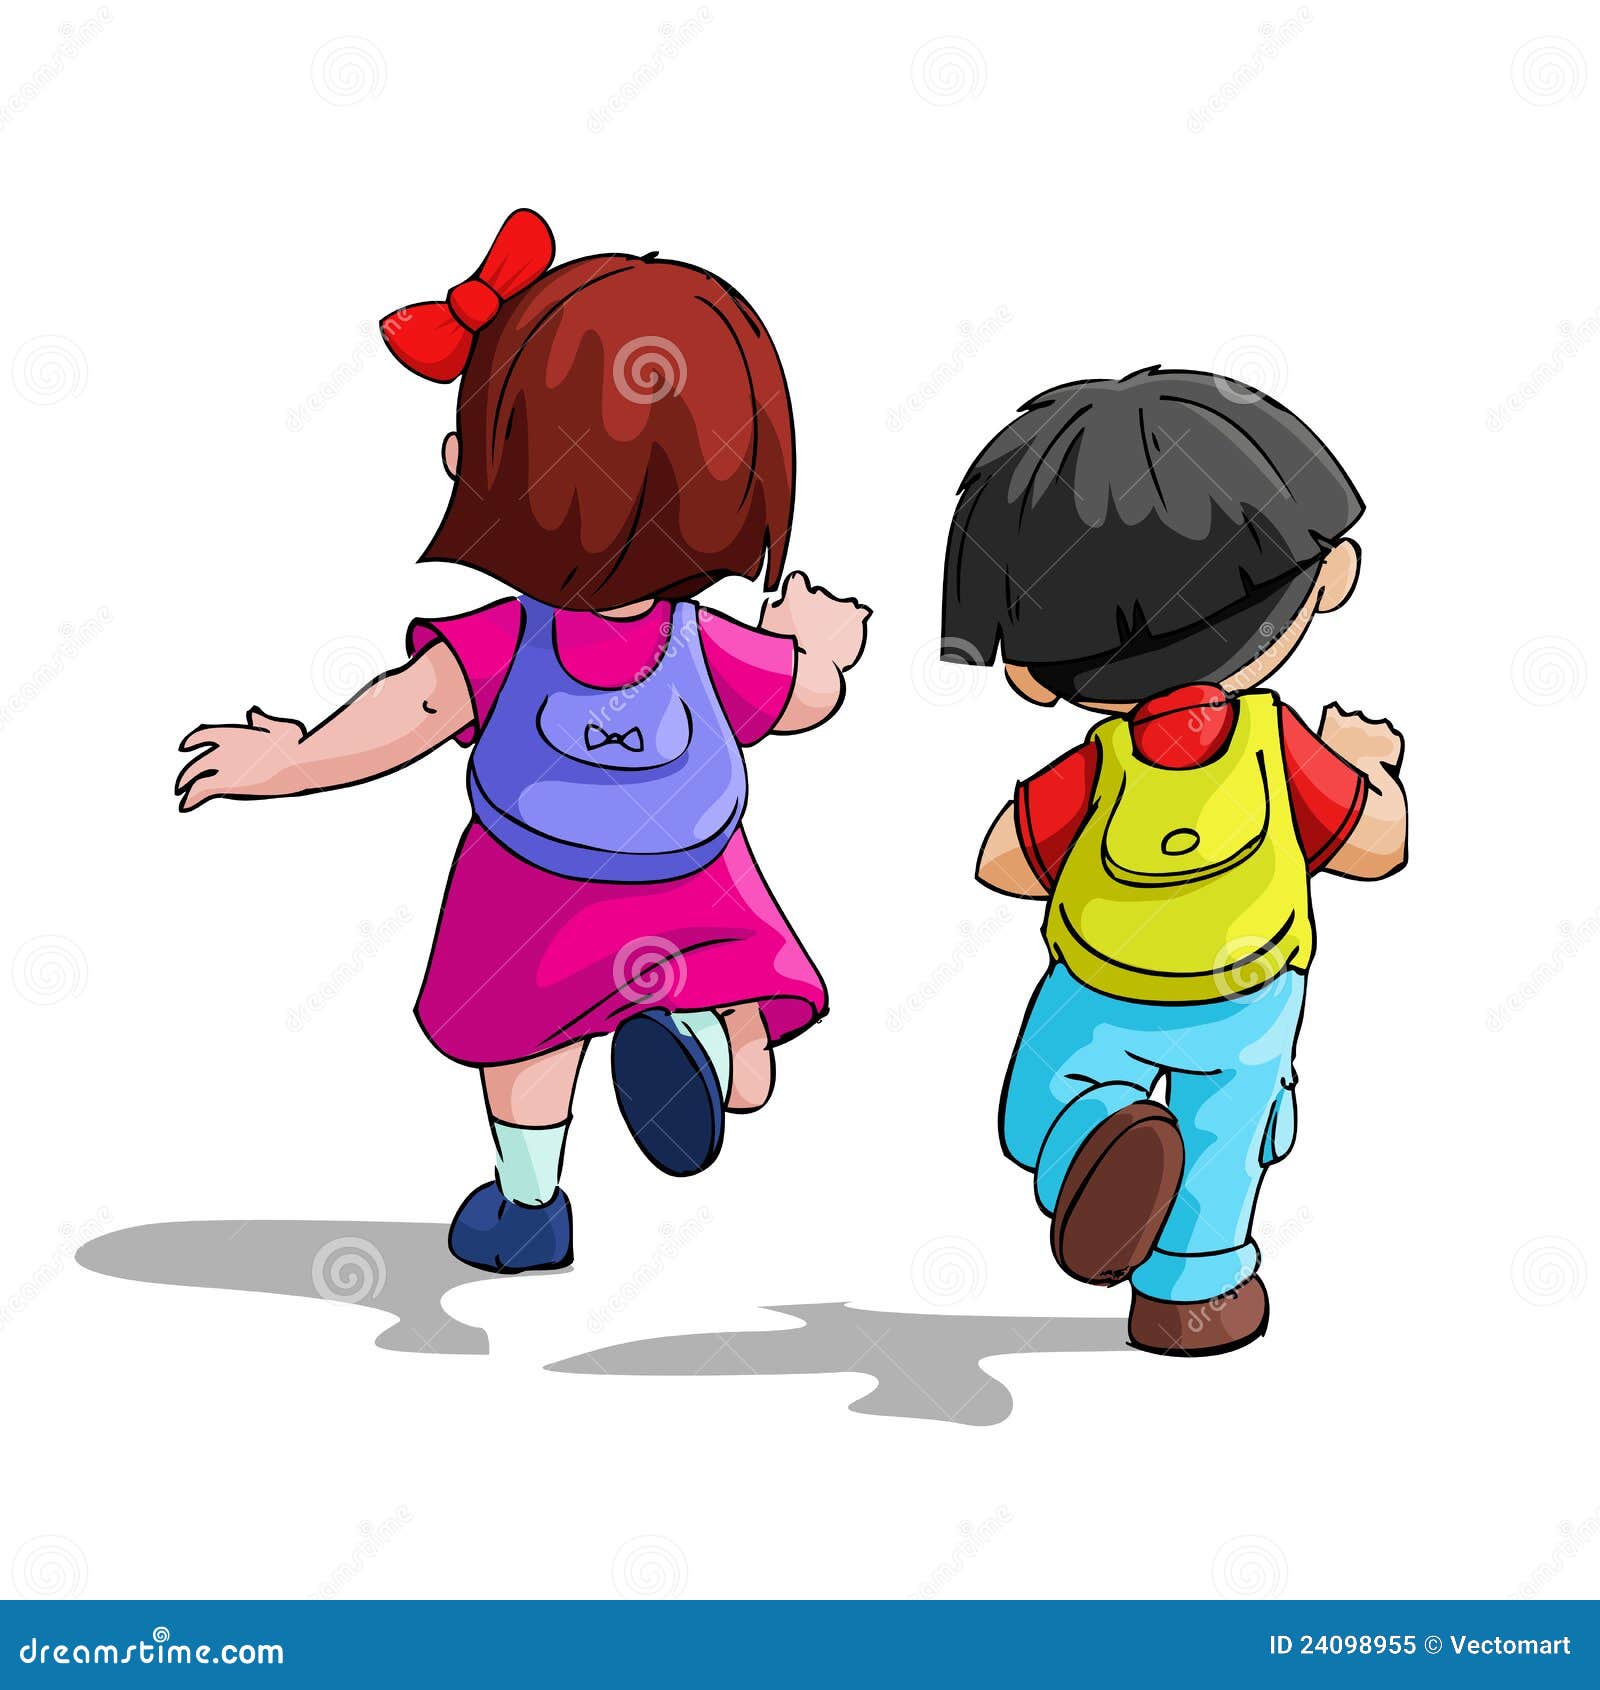 going back to school clipart - photo #30